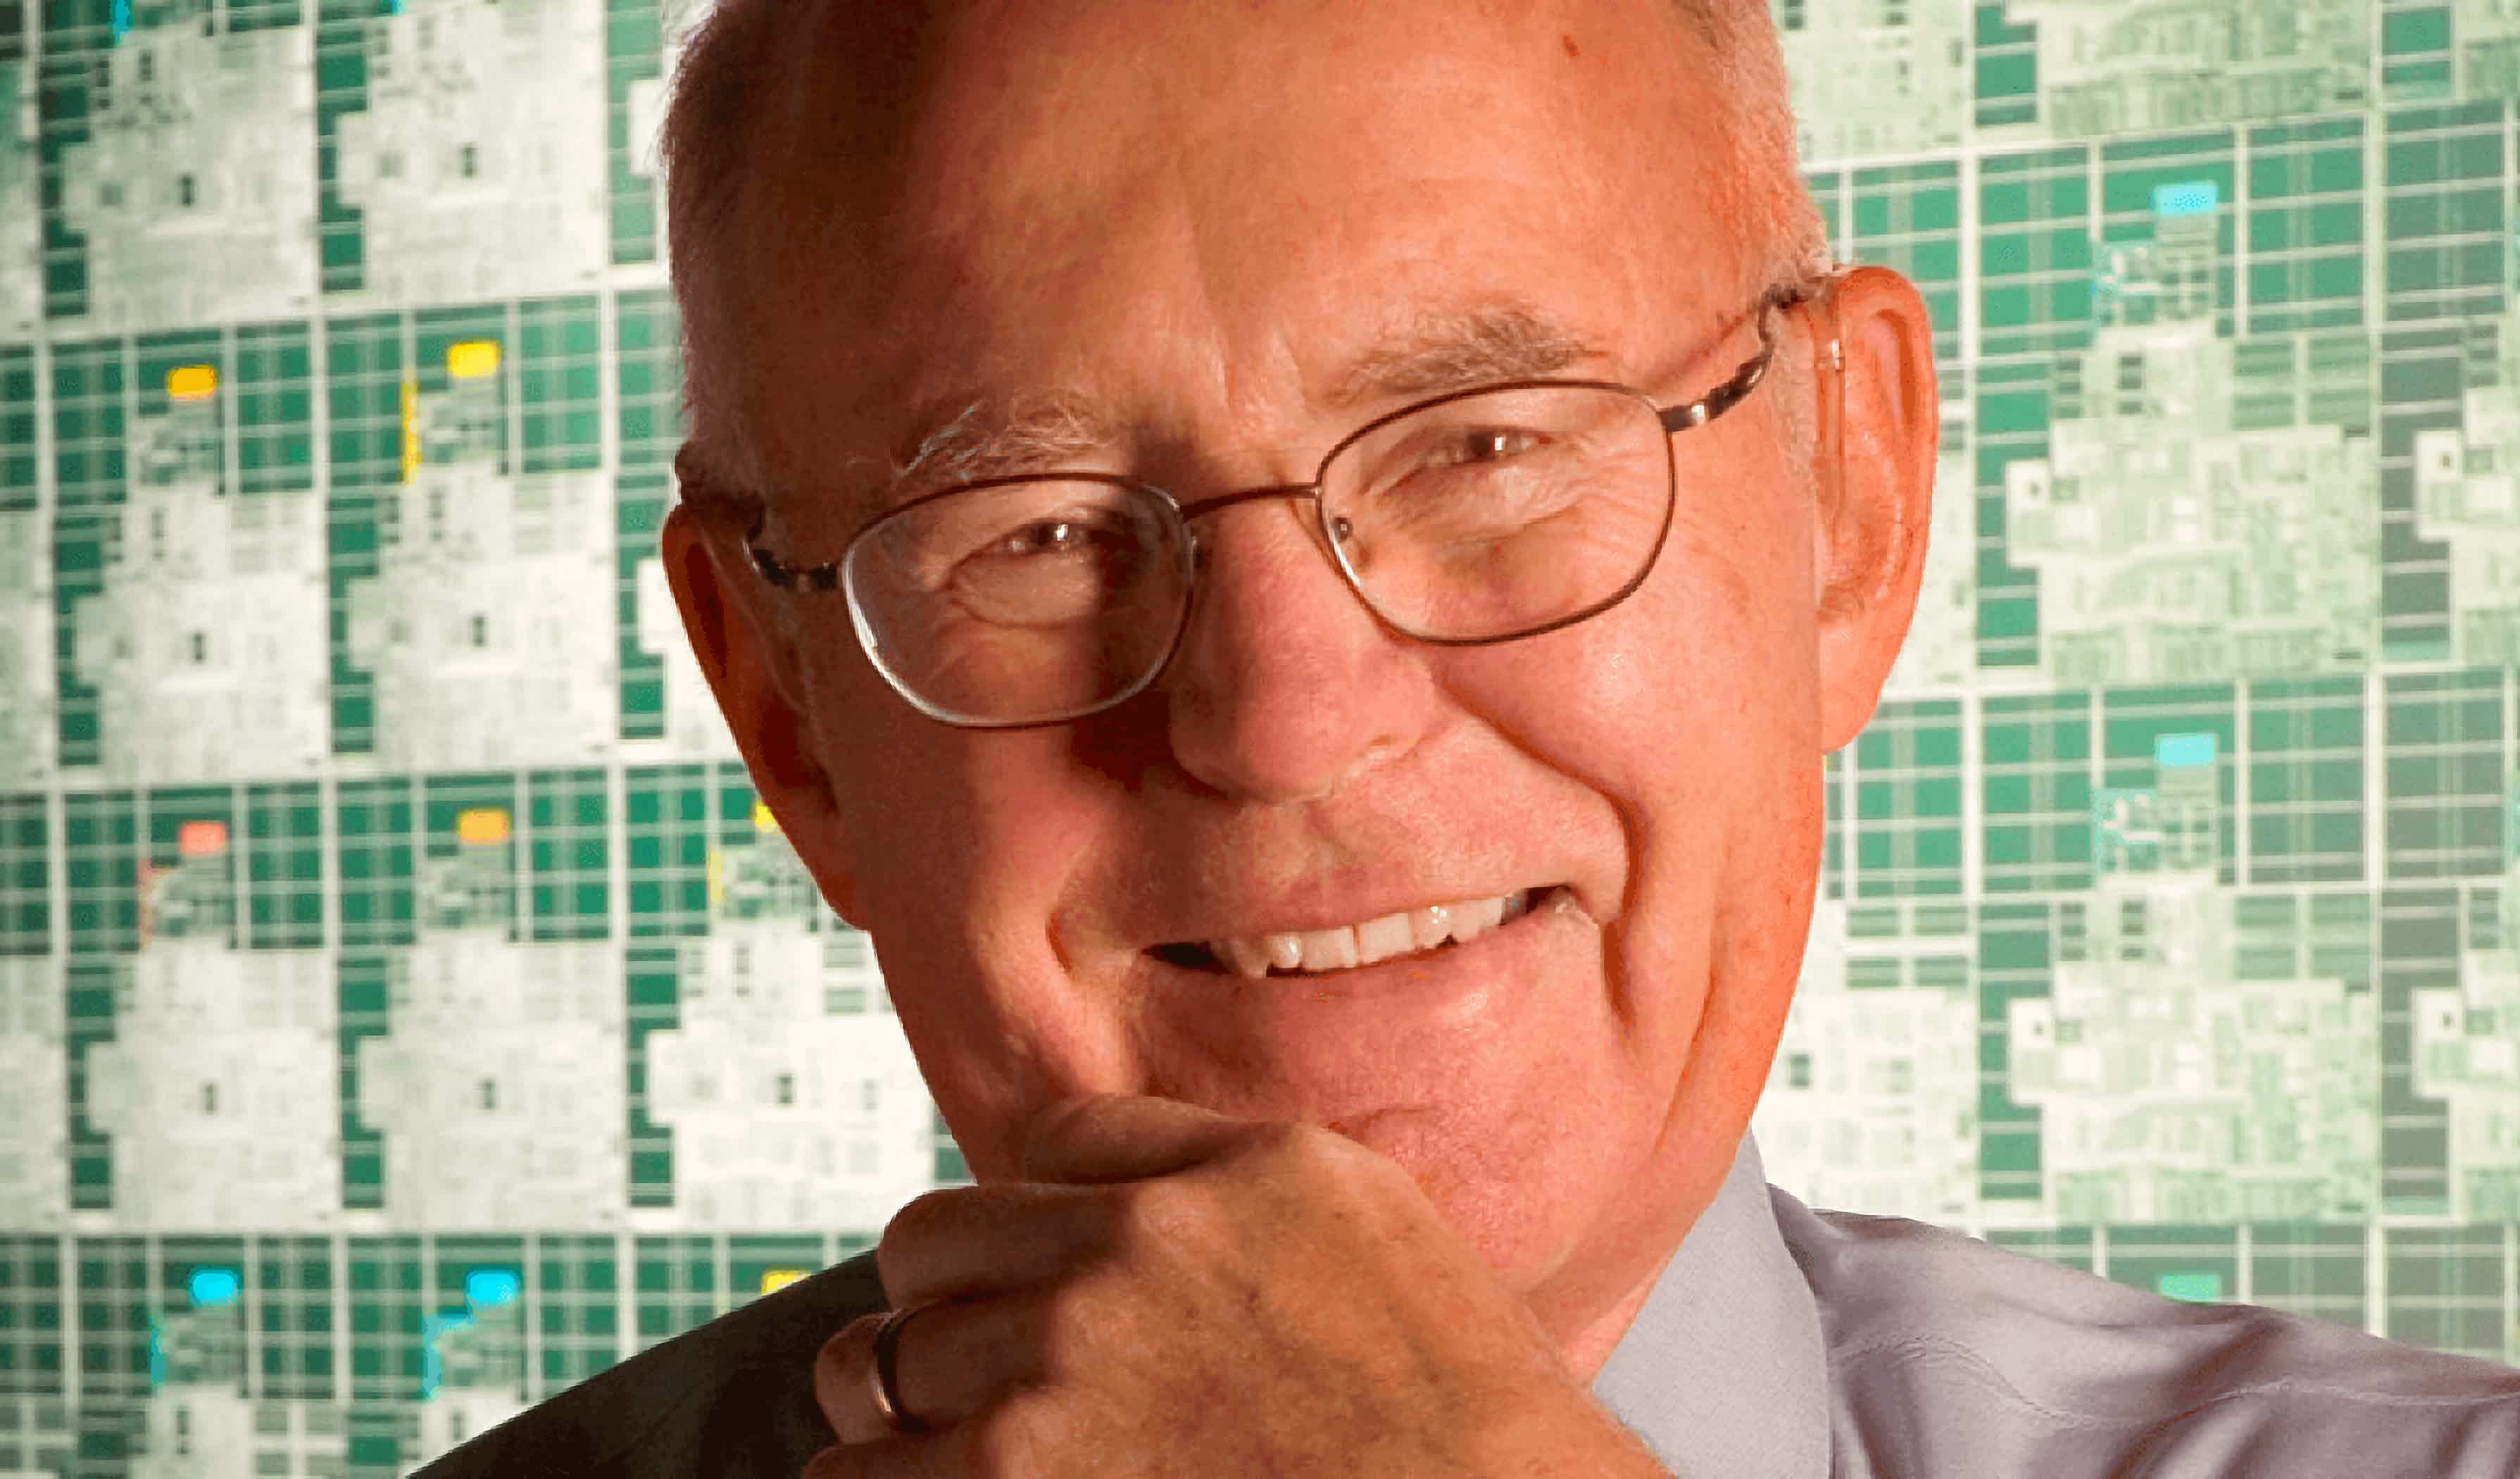 Tech community mourns the loss of Intel co-founder Gordon Moore